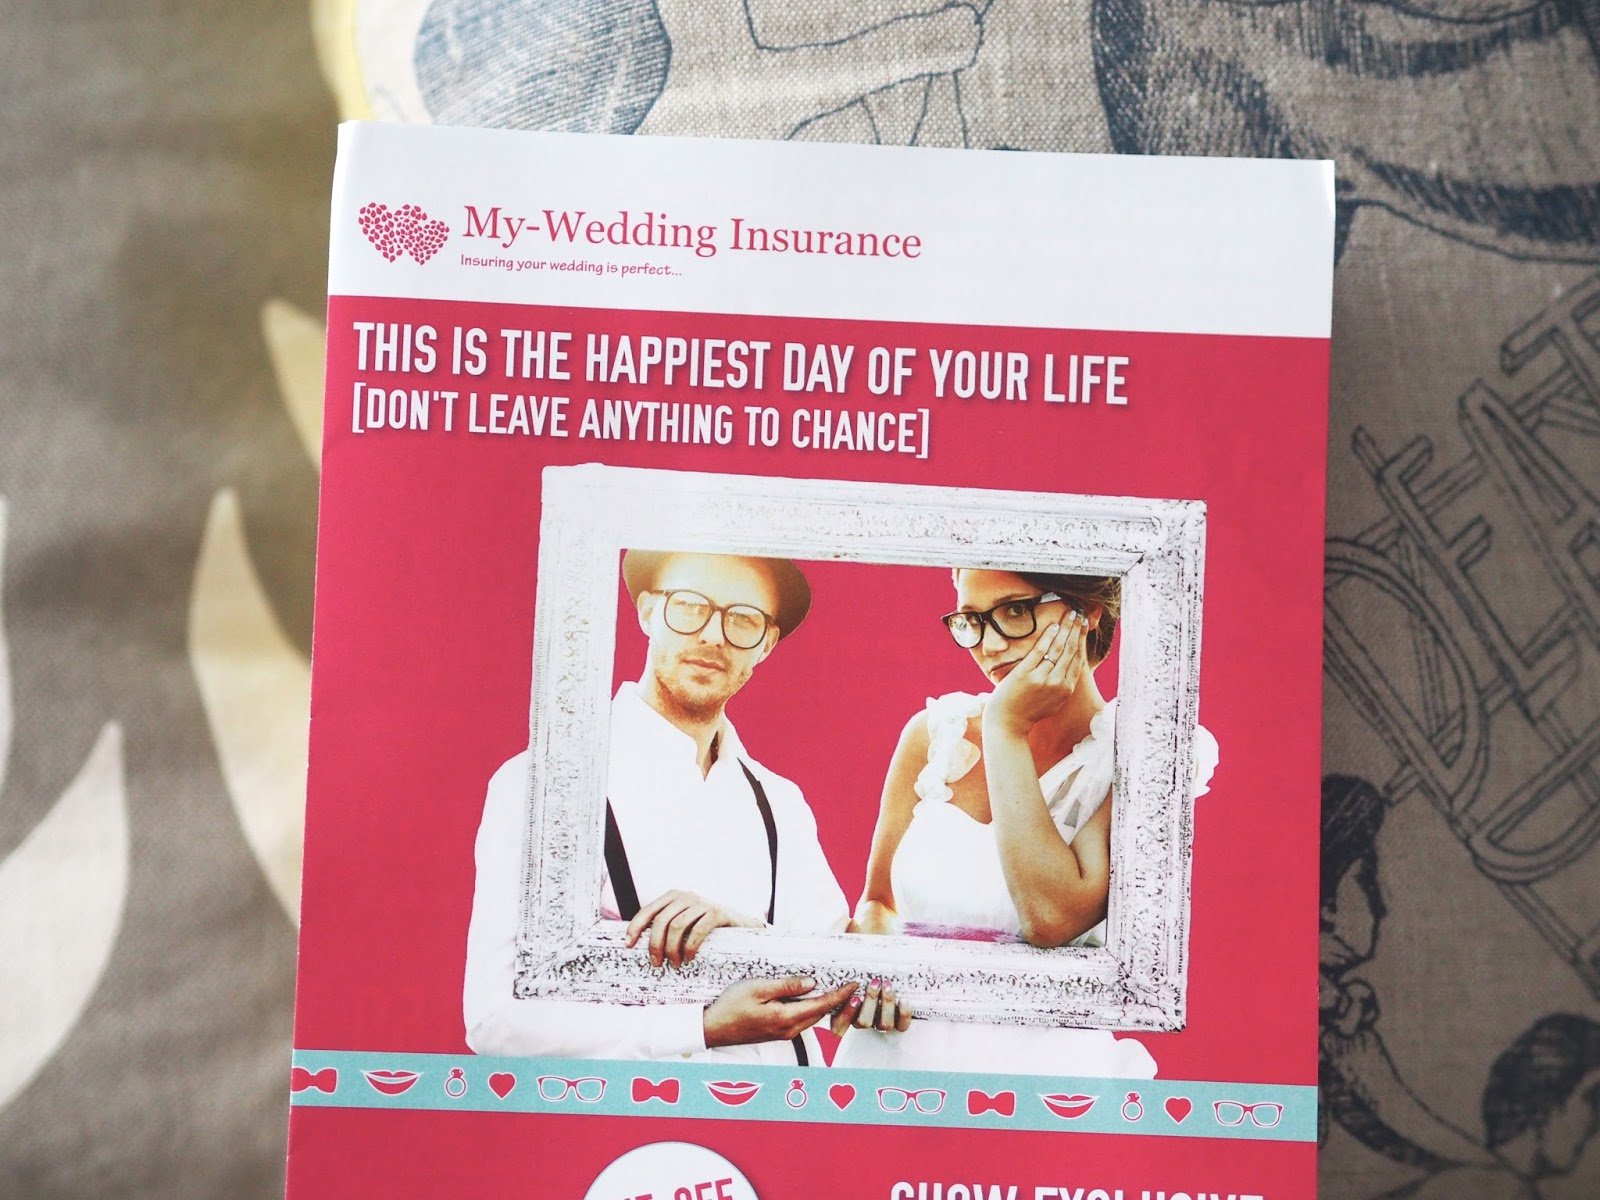 10 MONTHS TO GO: WEDDING INSURANCE